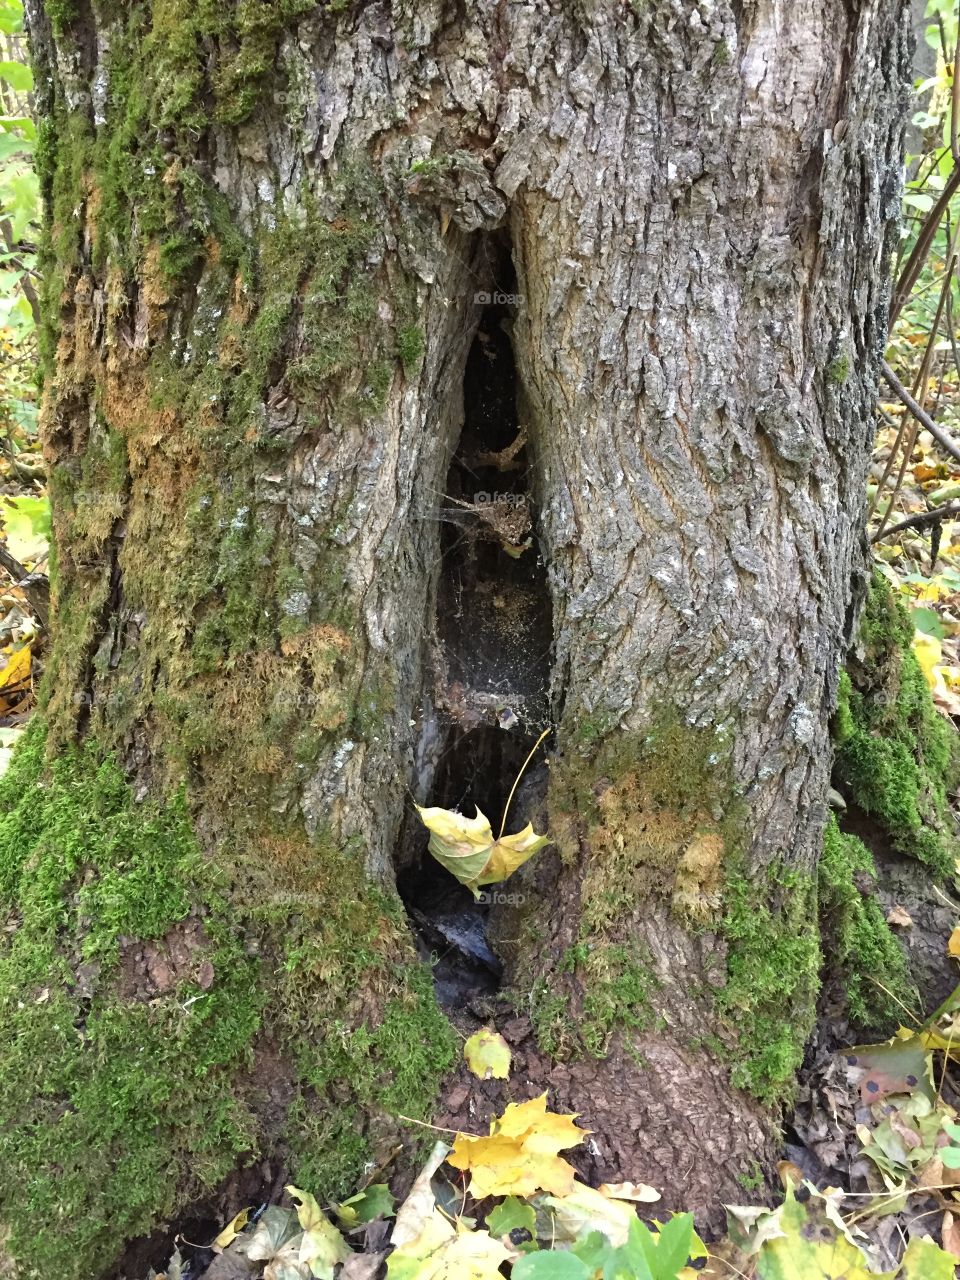 hollow in an old tree. Perhaps this is someone's house